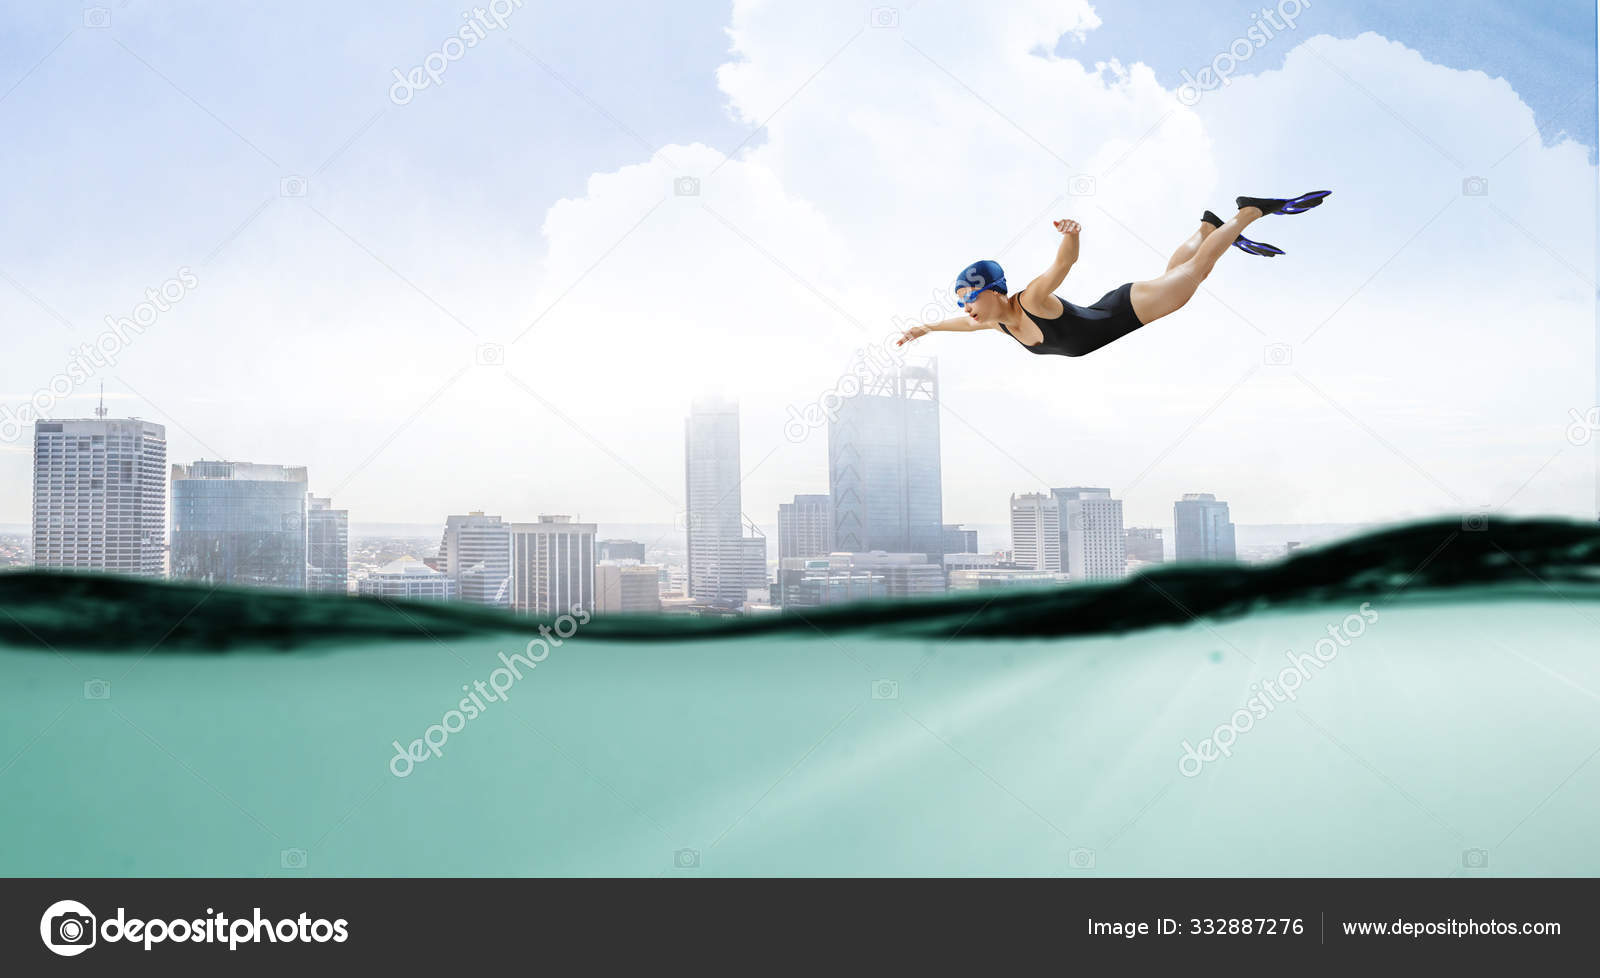 Swimmer in flippers. Mixed media Stock Photo by ©SergeyNivens 332887276